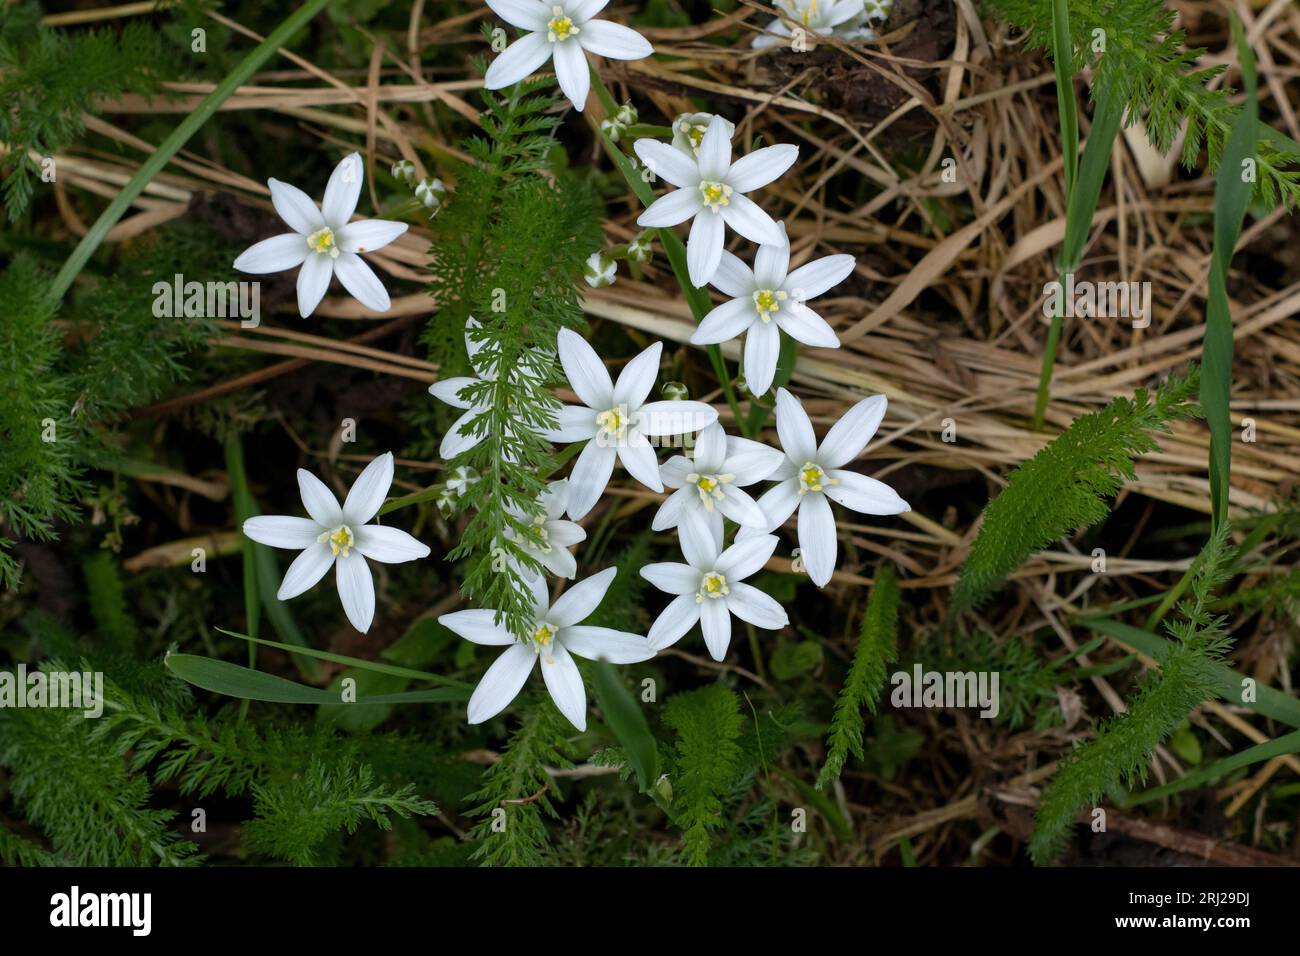 Bright white Ornithogalum Star of Bethlehem flowers in spring garden close-up top view Stock Photo